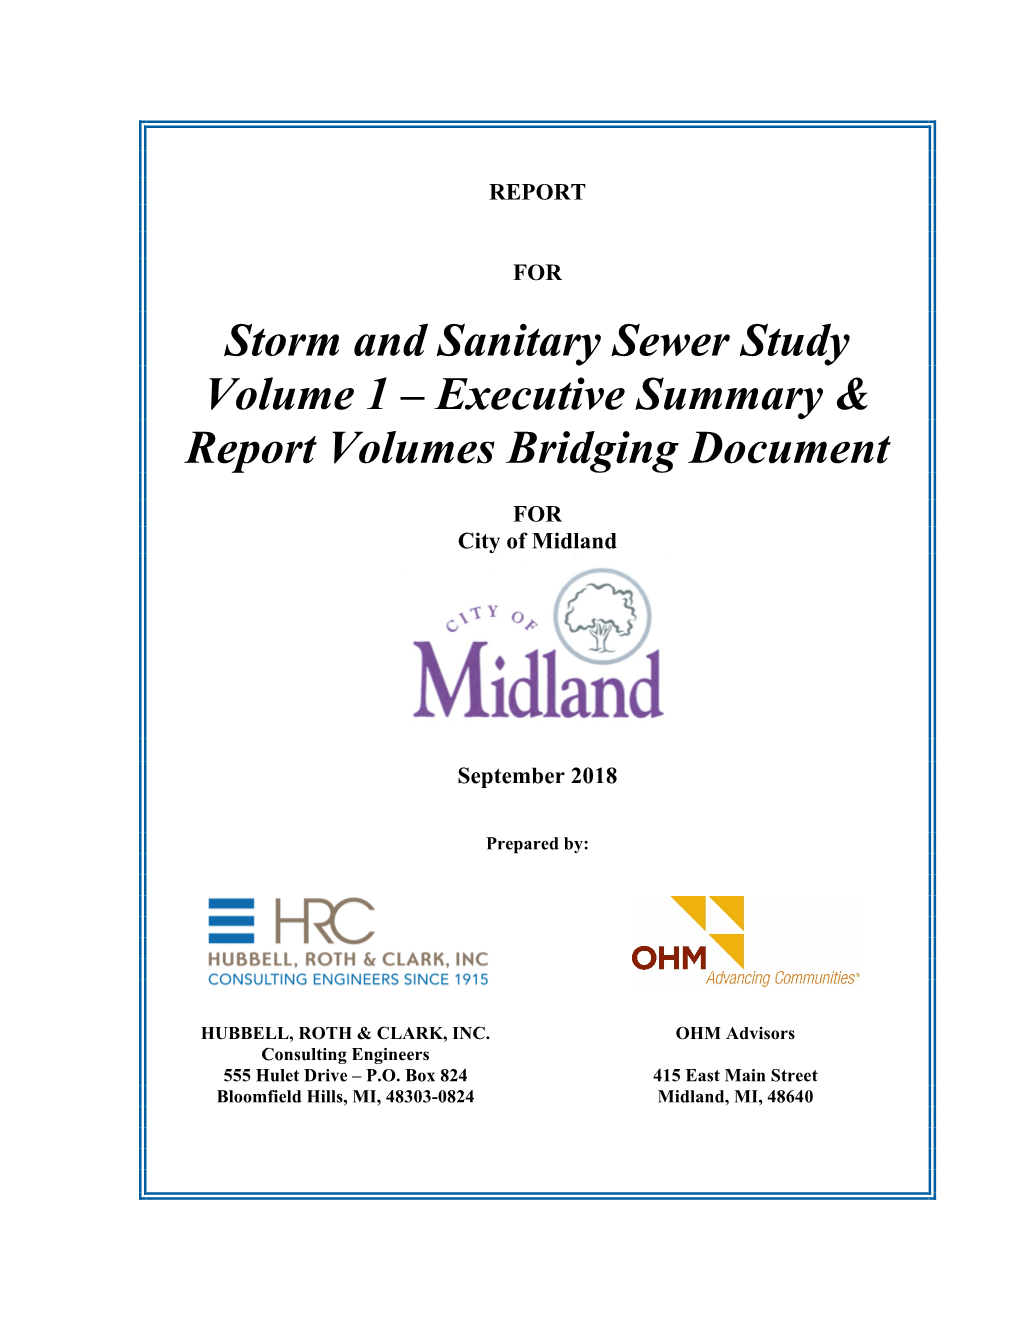 Storm and Sanitary Sewer Study Volume 1 – Executive Summary & Report Volumes Bridging Document